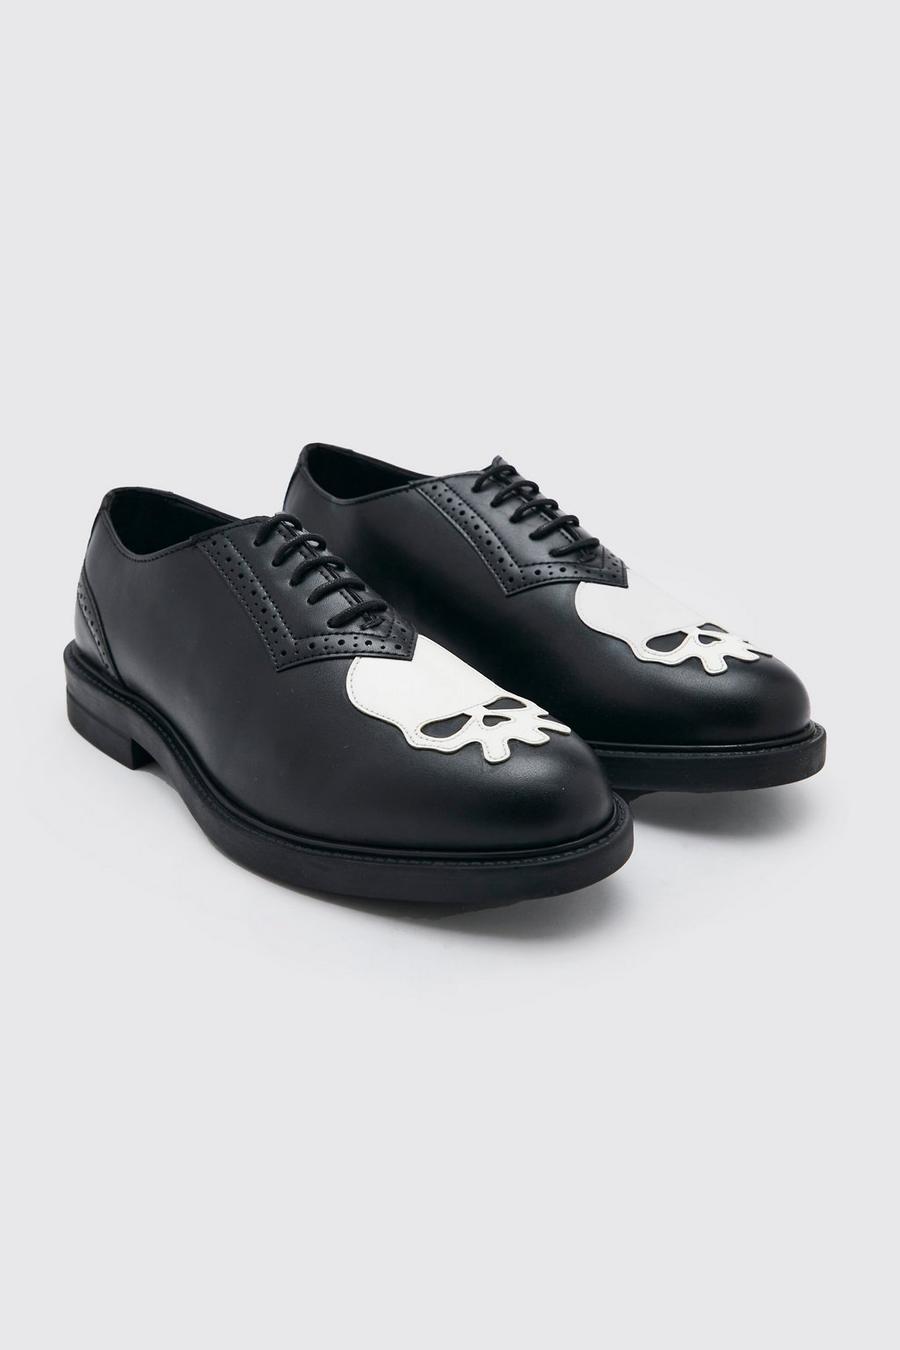 Black Faux Leather Skull Brogue 